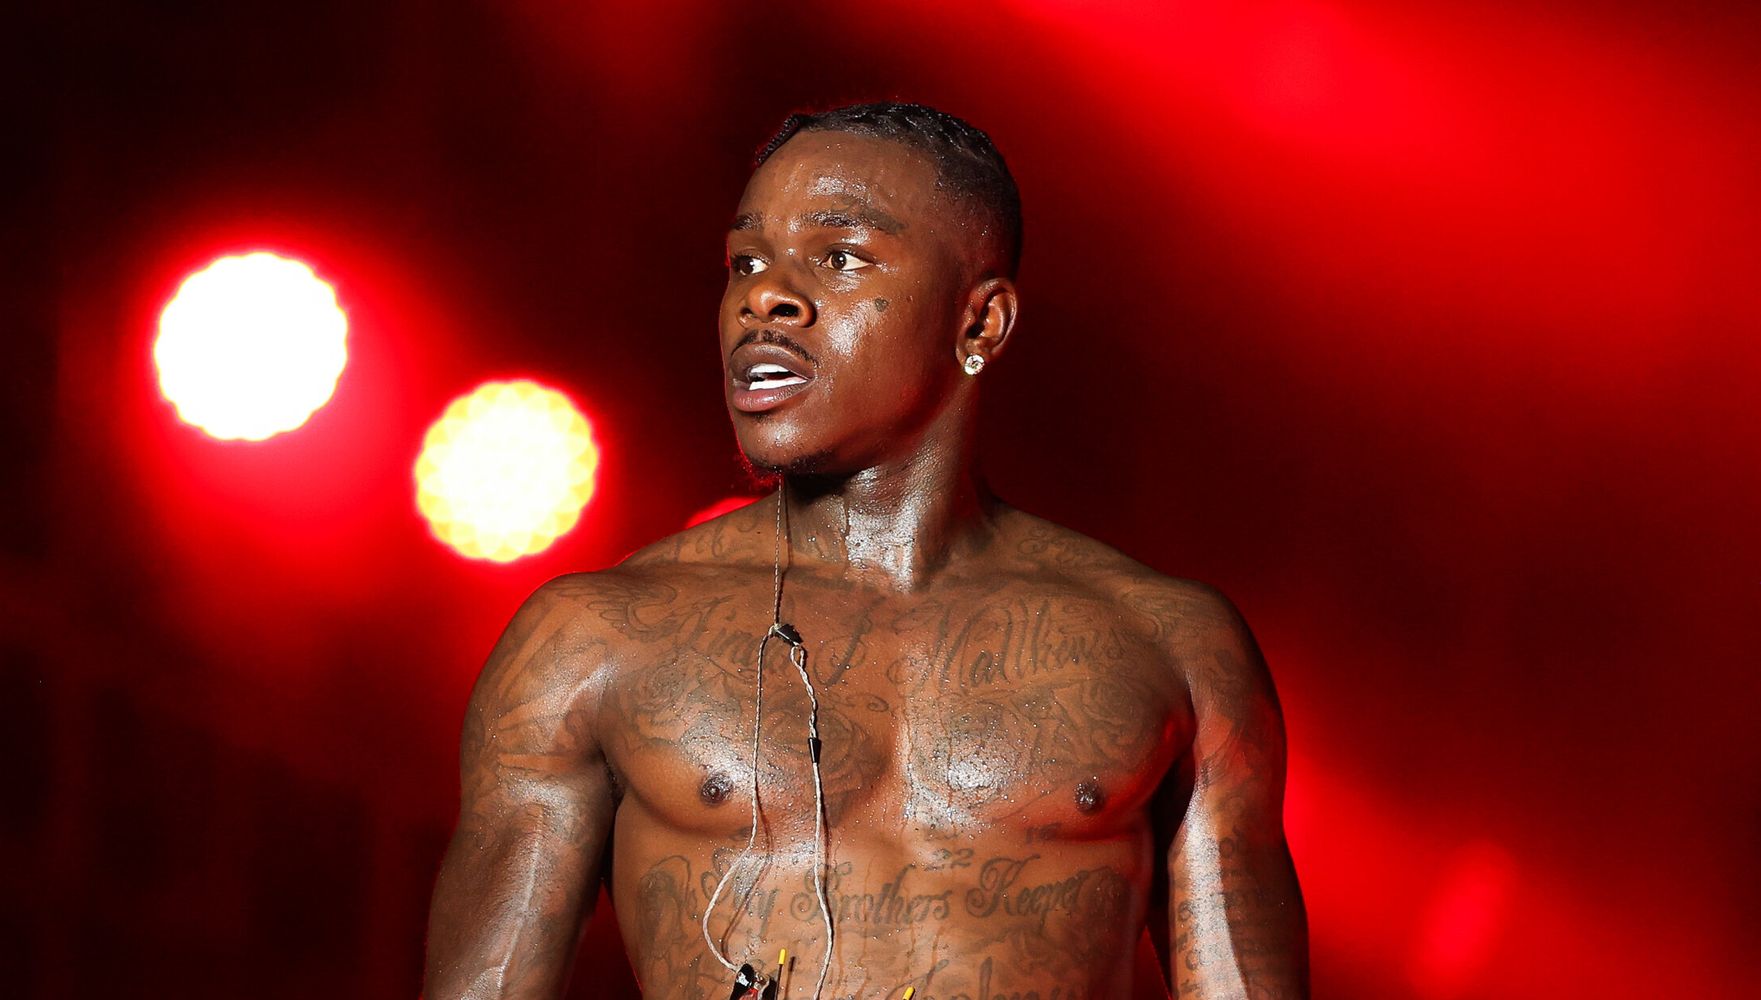 Lollapalooza Drops DaBaby Over Homophobic Comments Hours Before His Performance